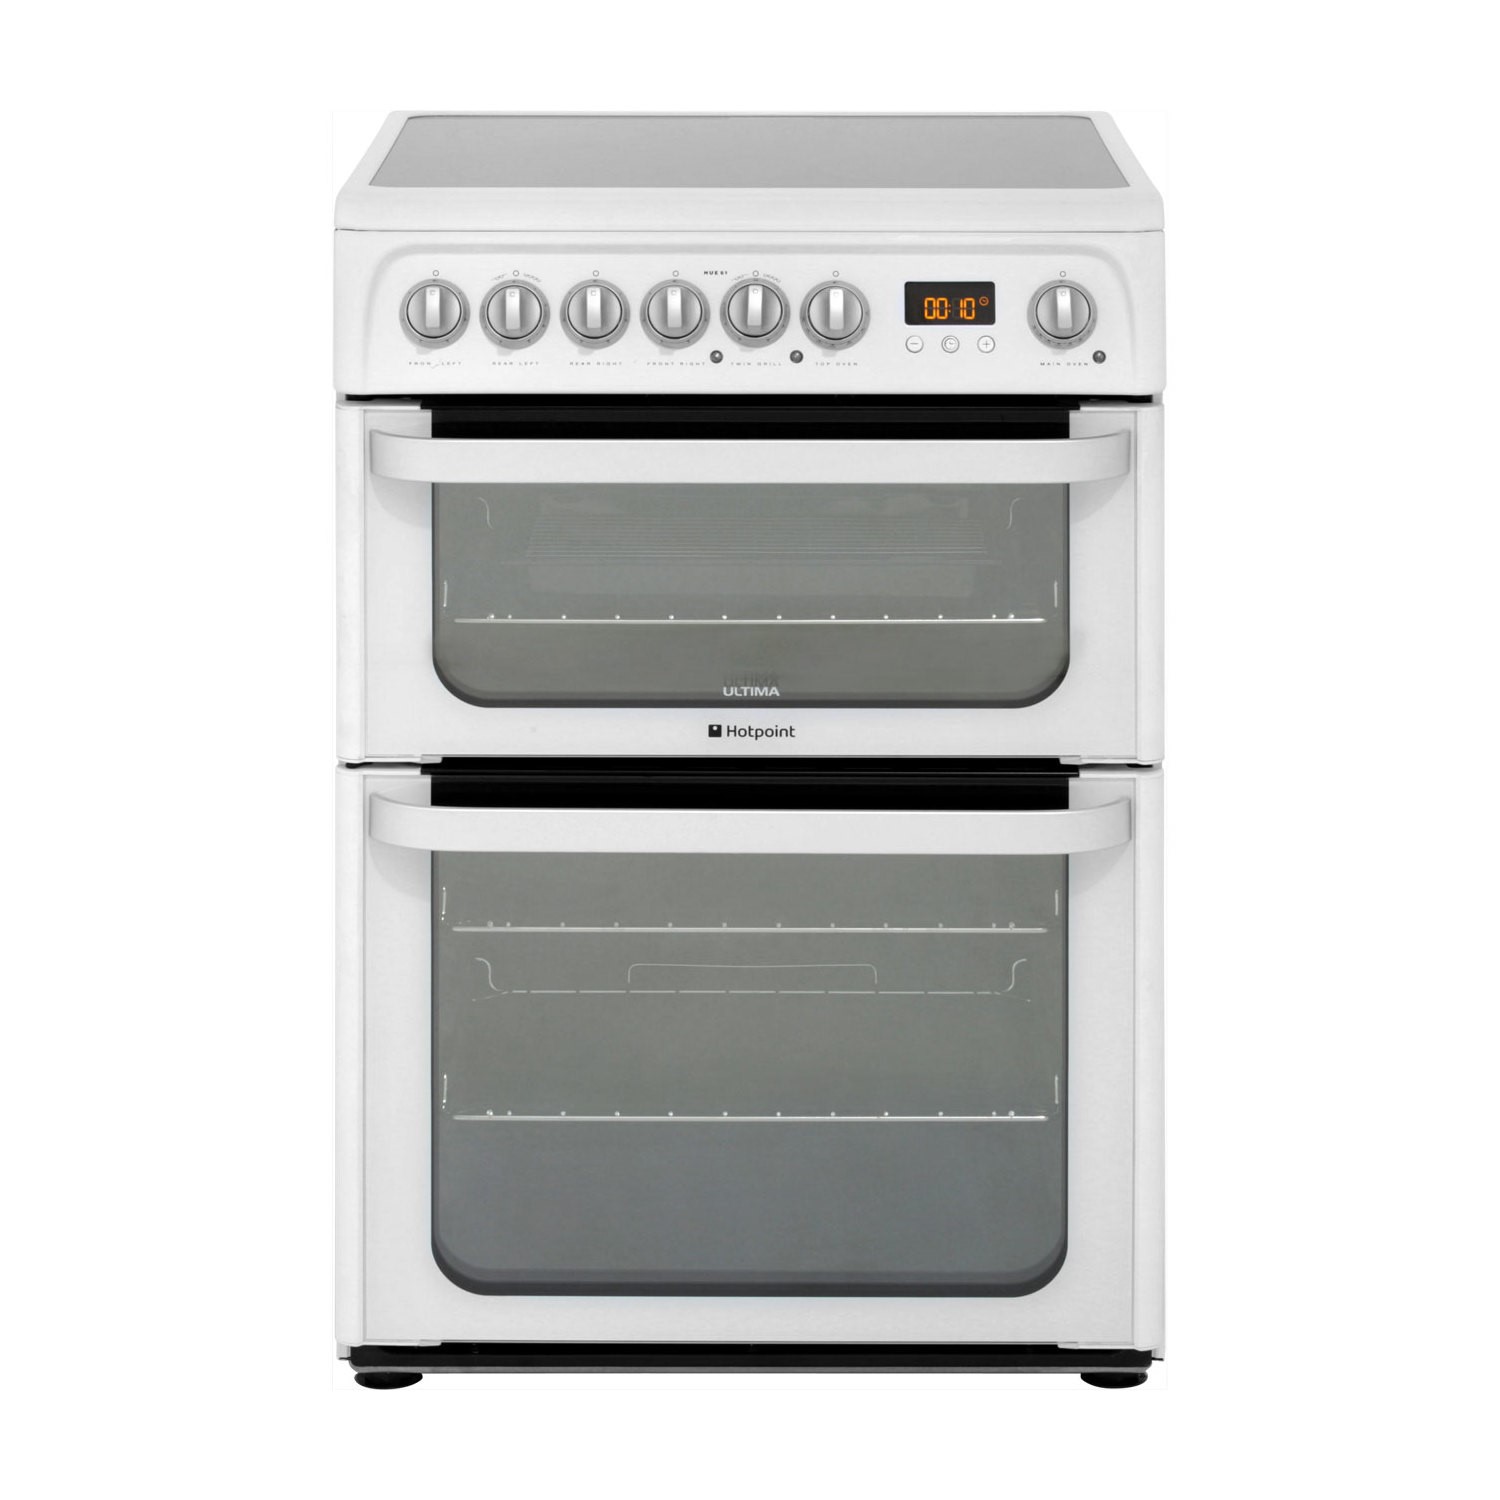 Refurbished Hotpoint HUE61PS 60cm Double Oven Electric Cooker White